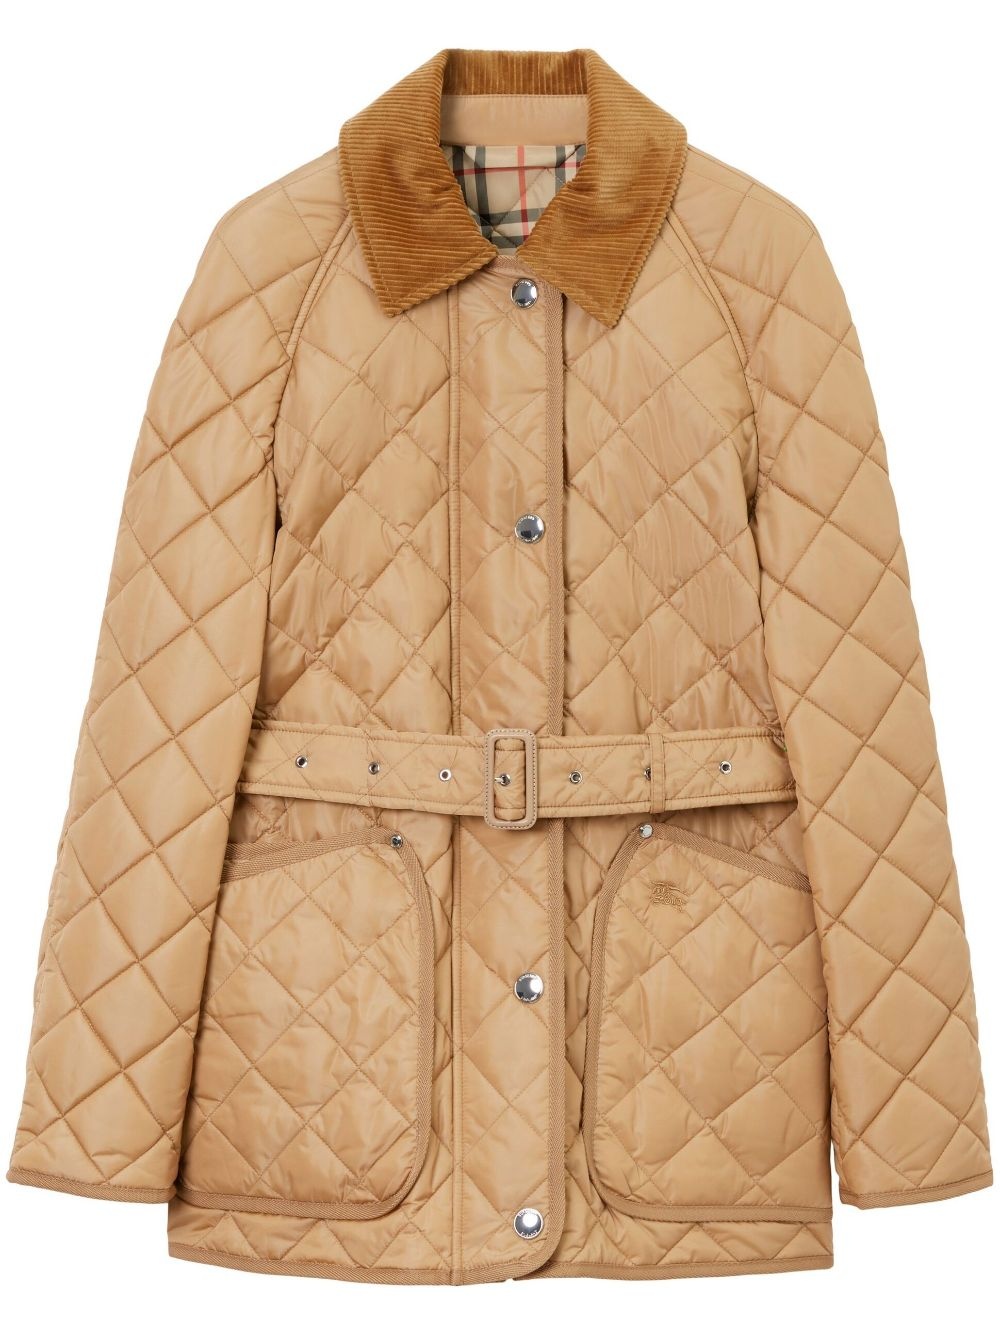 diamond-quilted belted jacket - 1